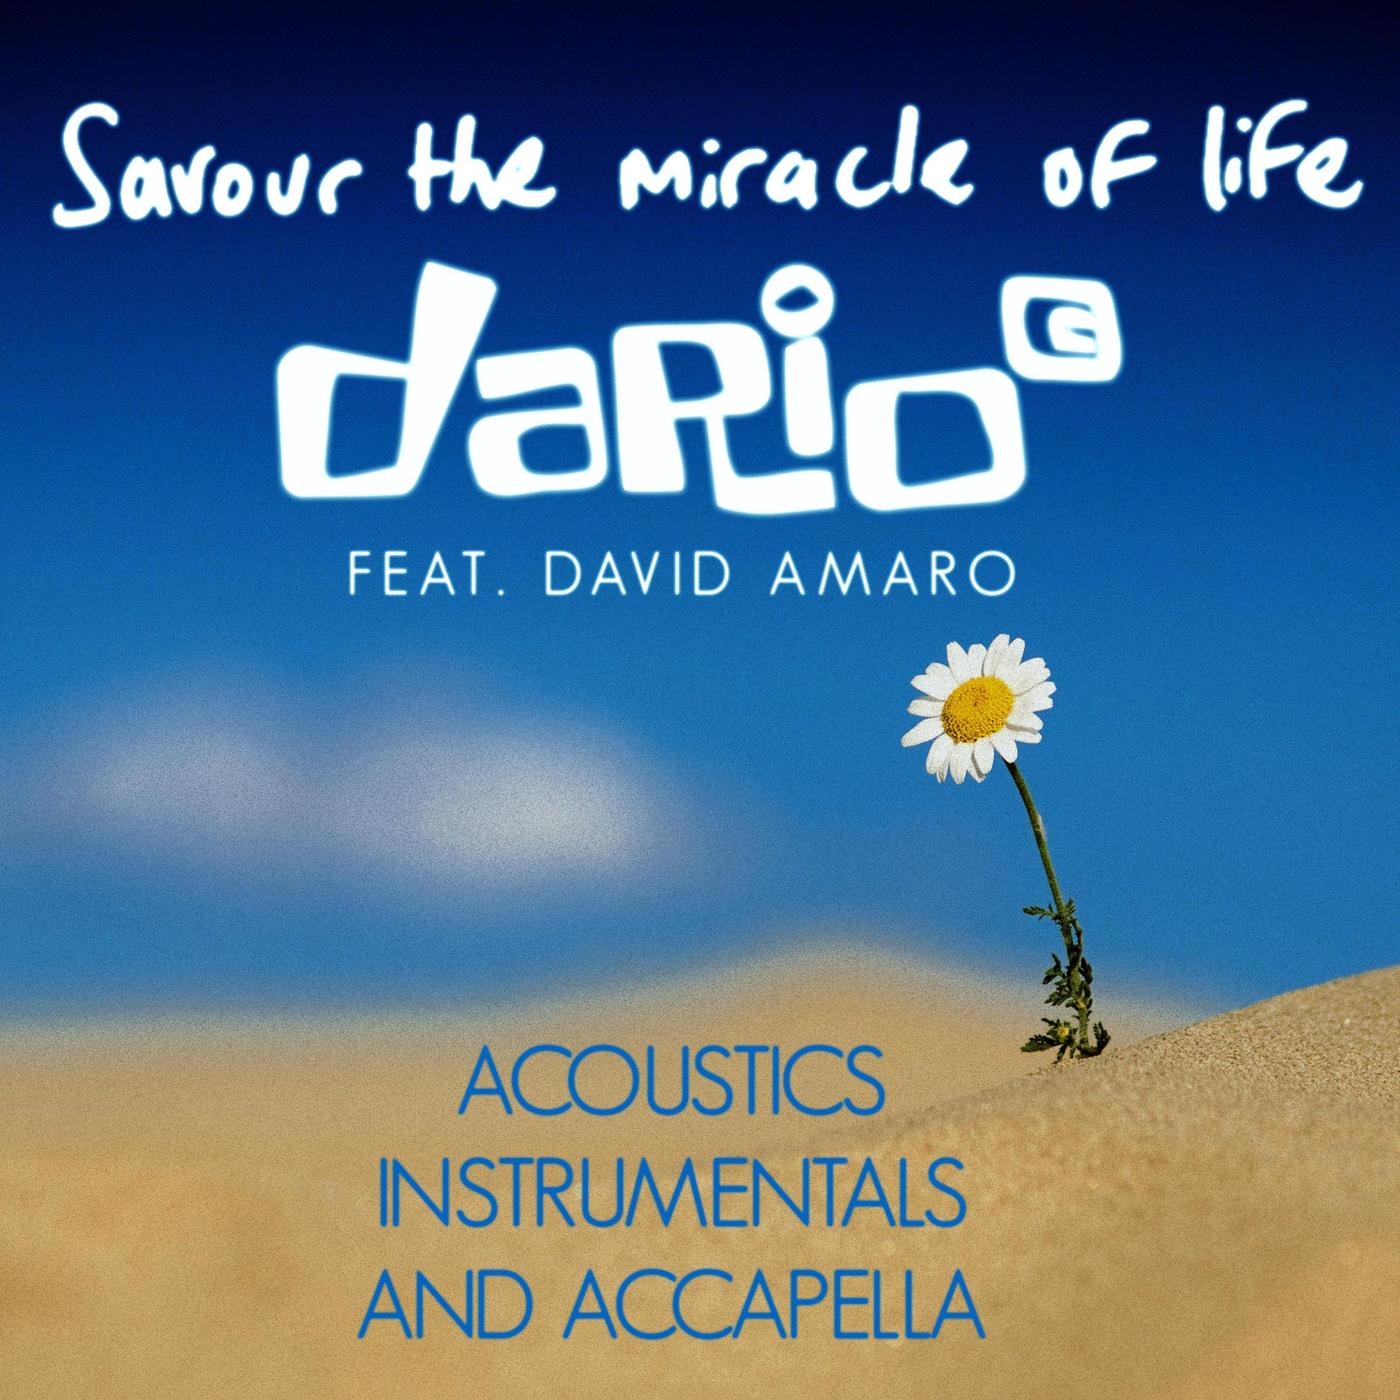 Dario G - Savour the Miracle of Life (Accapella)